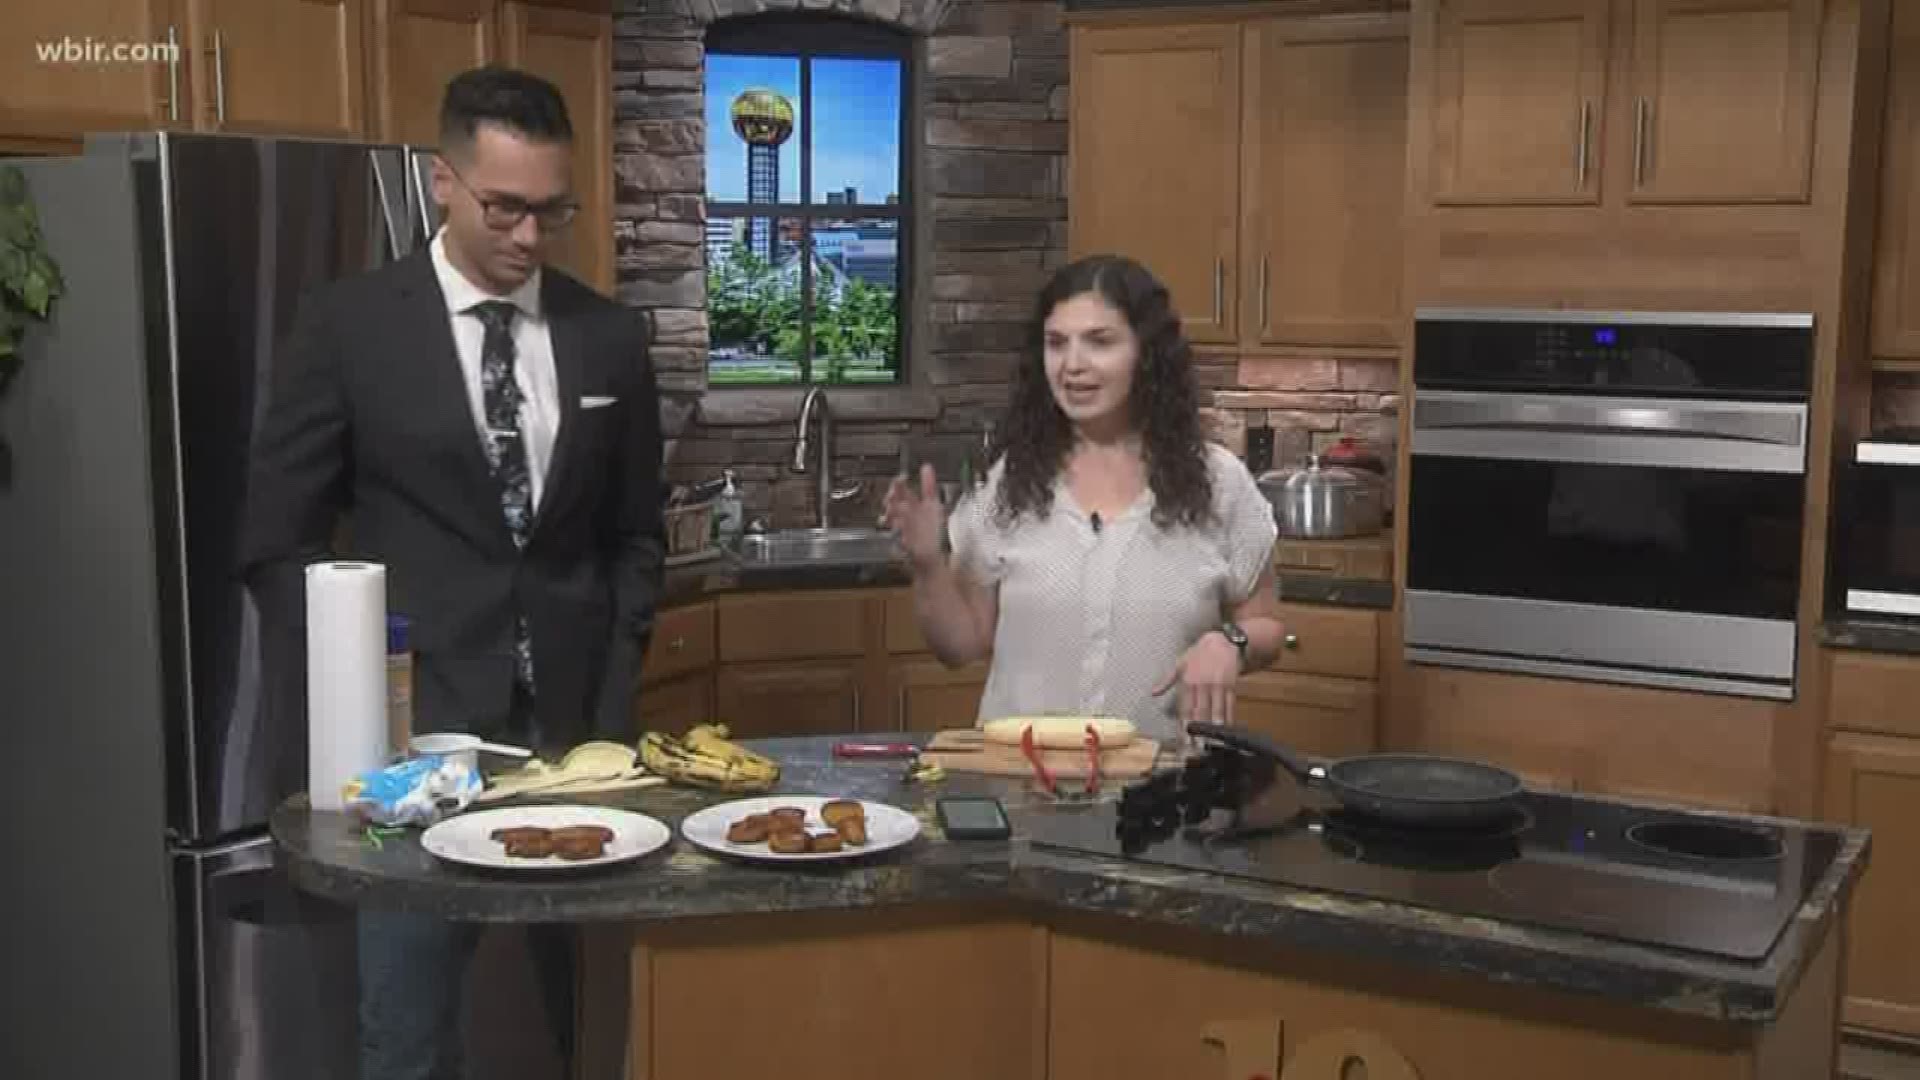 As part of Hispanic Heritage Month, Louis Fernandez and producer Angelica Iglesias show how to cook plantains. Oct. 10, 2019-4pm.